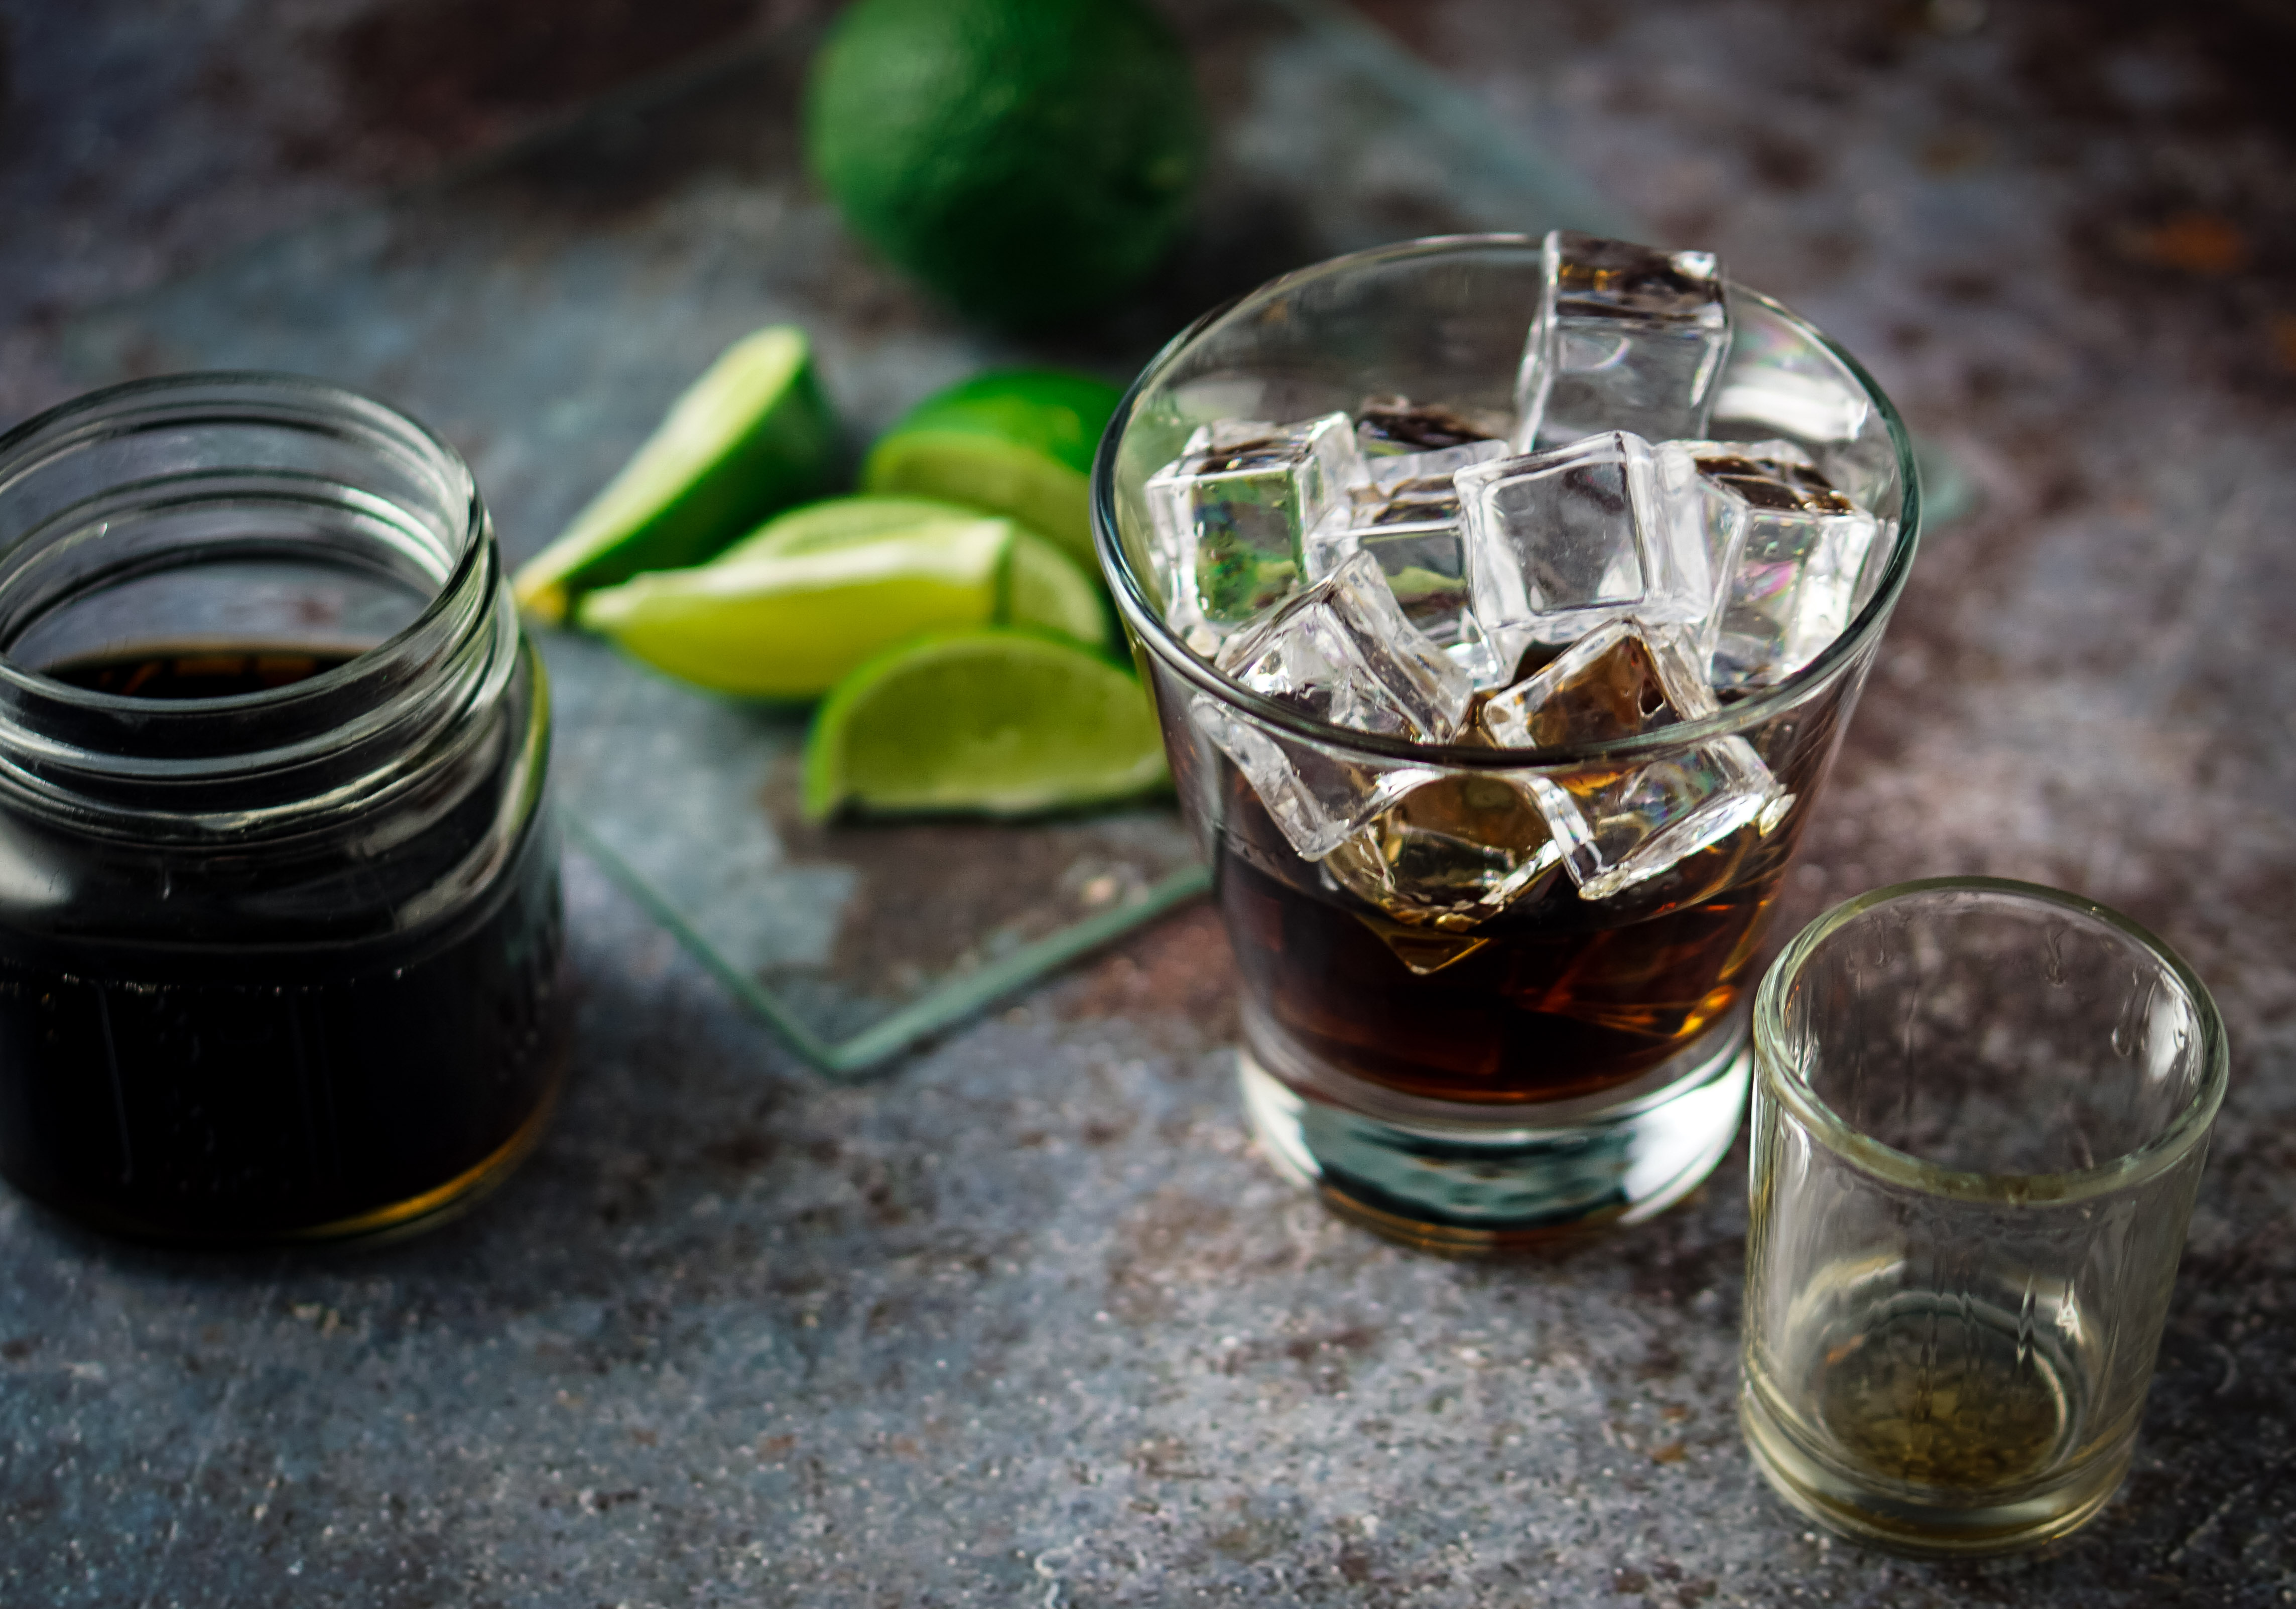 A Cuba Libre is so much more than a rum and Coke! Aged, dark rum, a squeeze of lime and Coca Cola combine to create a cocktail with both flavor and history! ~by Wet Whistle Drinks by Darla Bentley